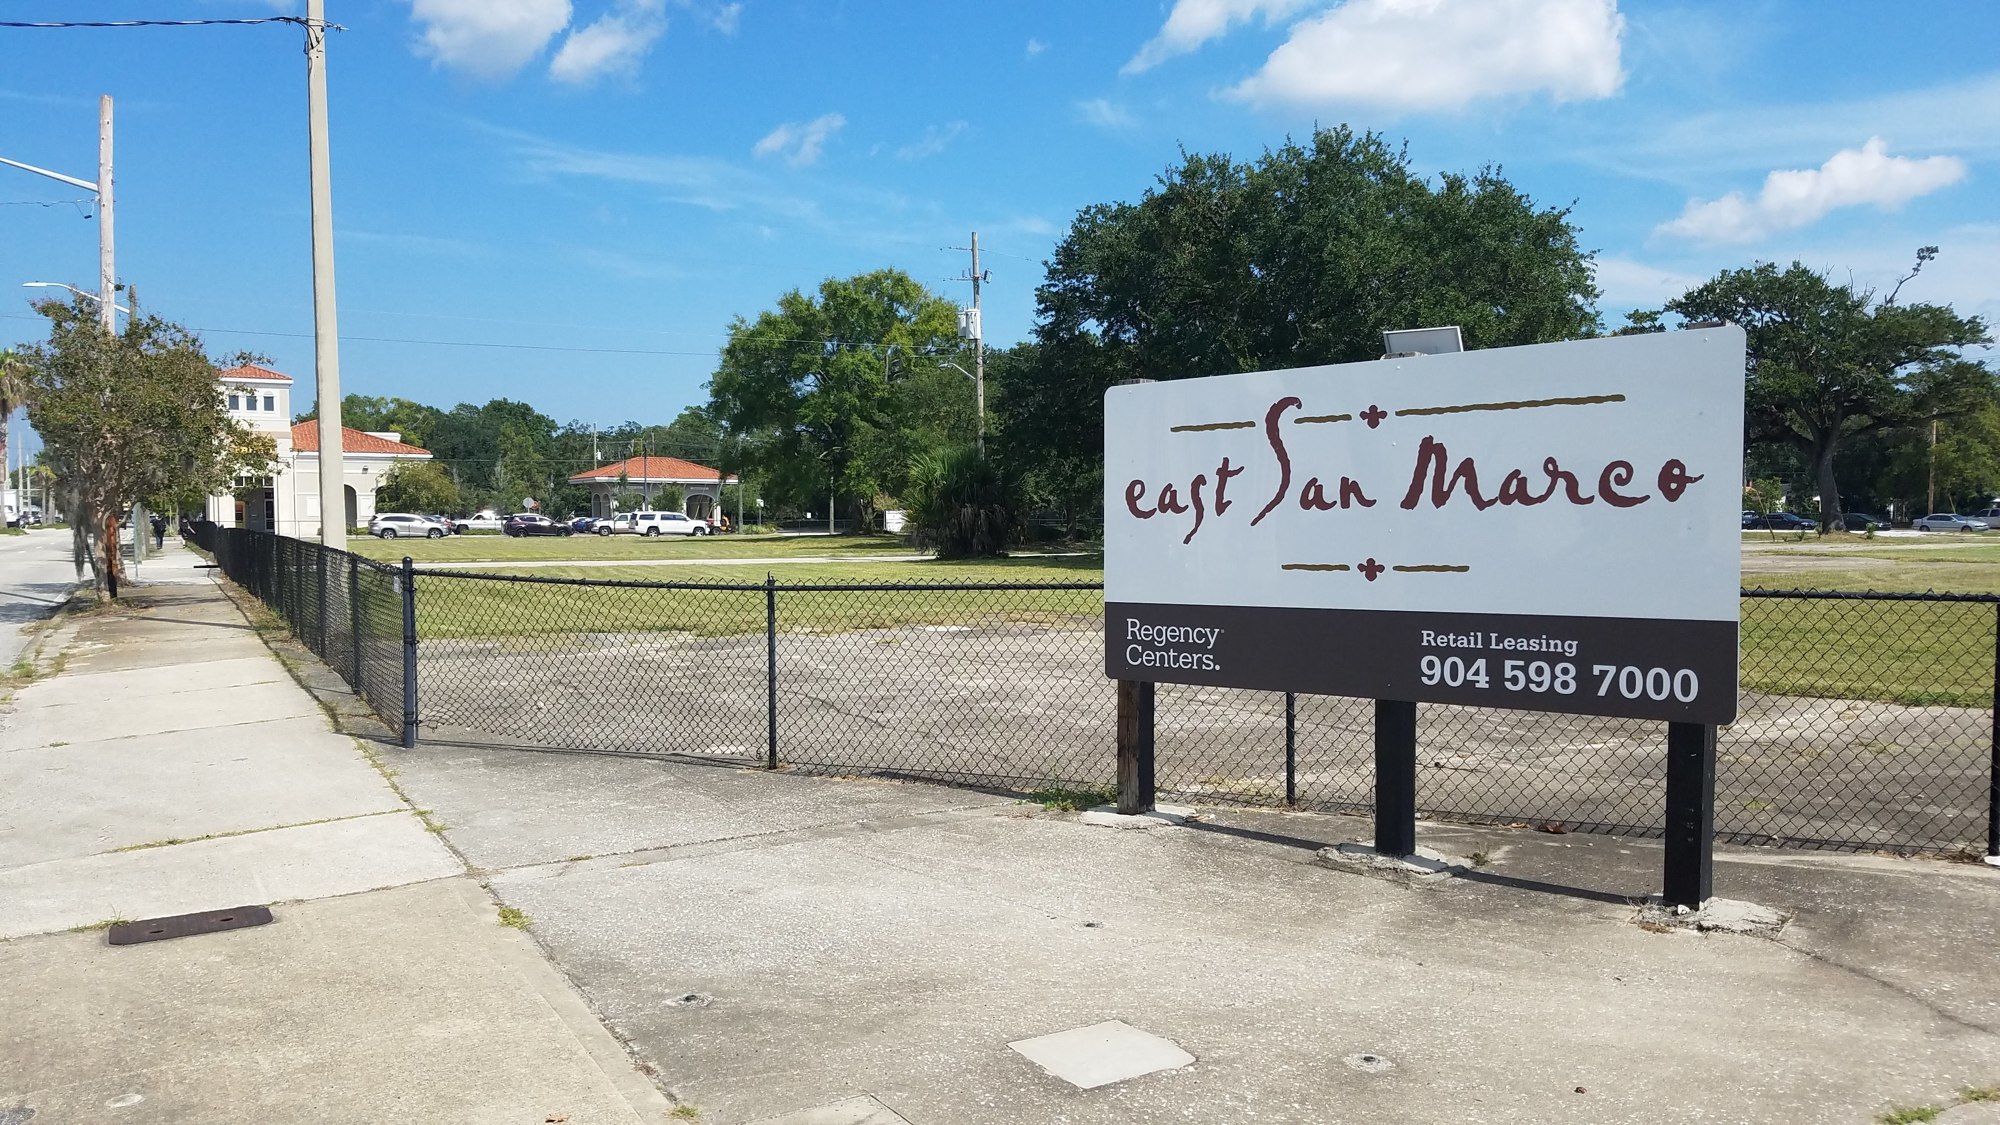 East San Marco has been planned for nearly 20 years.